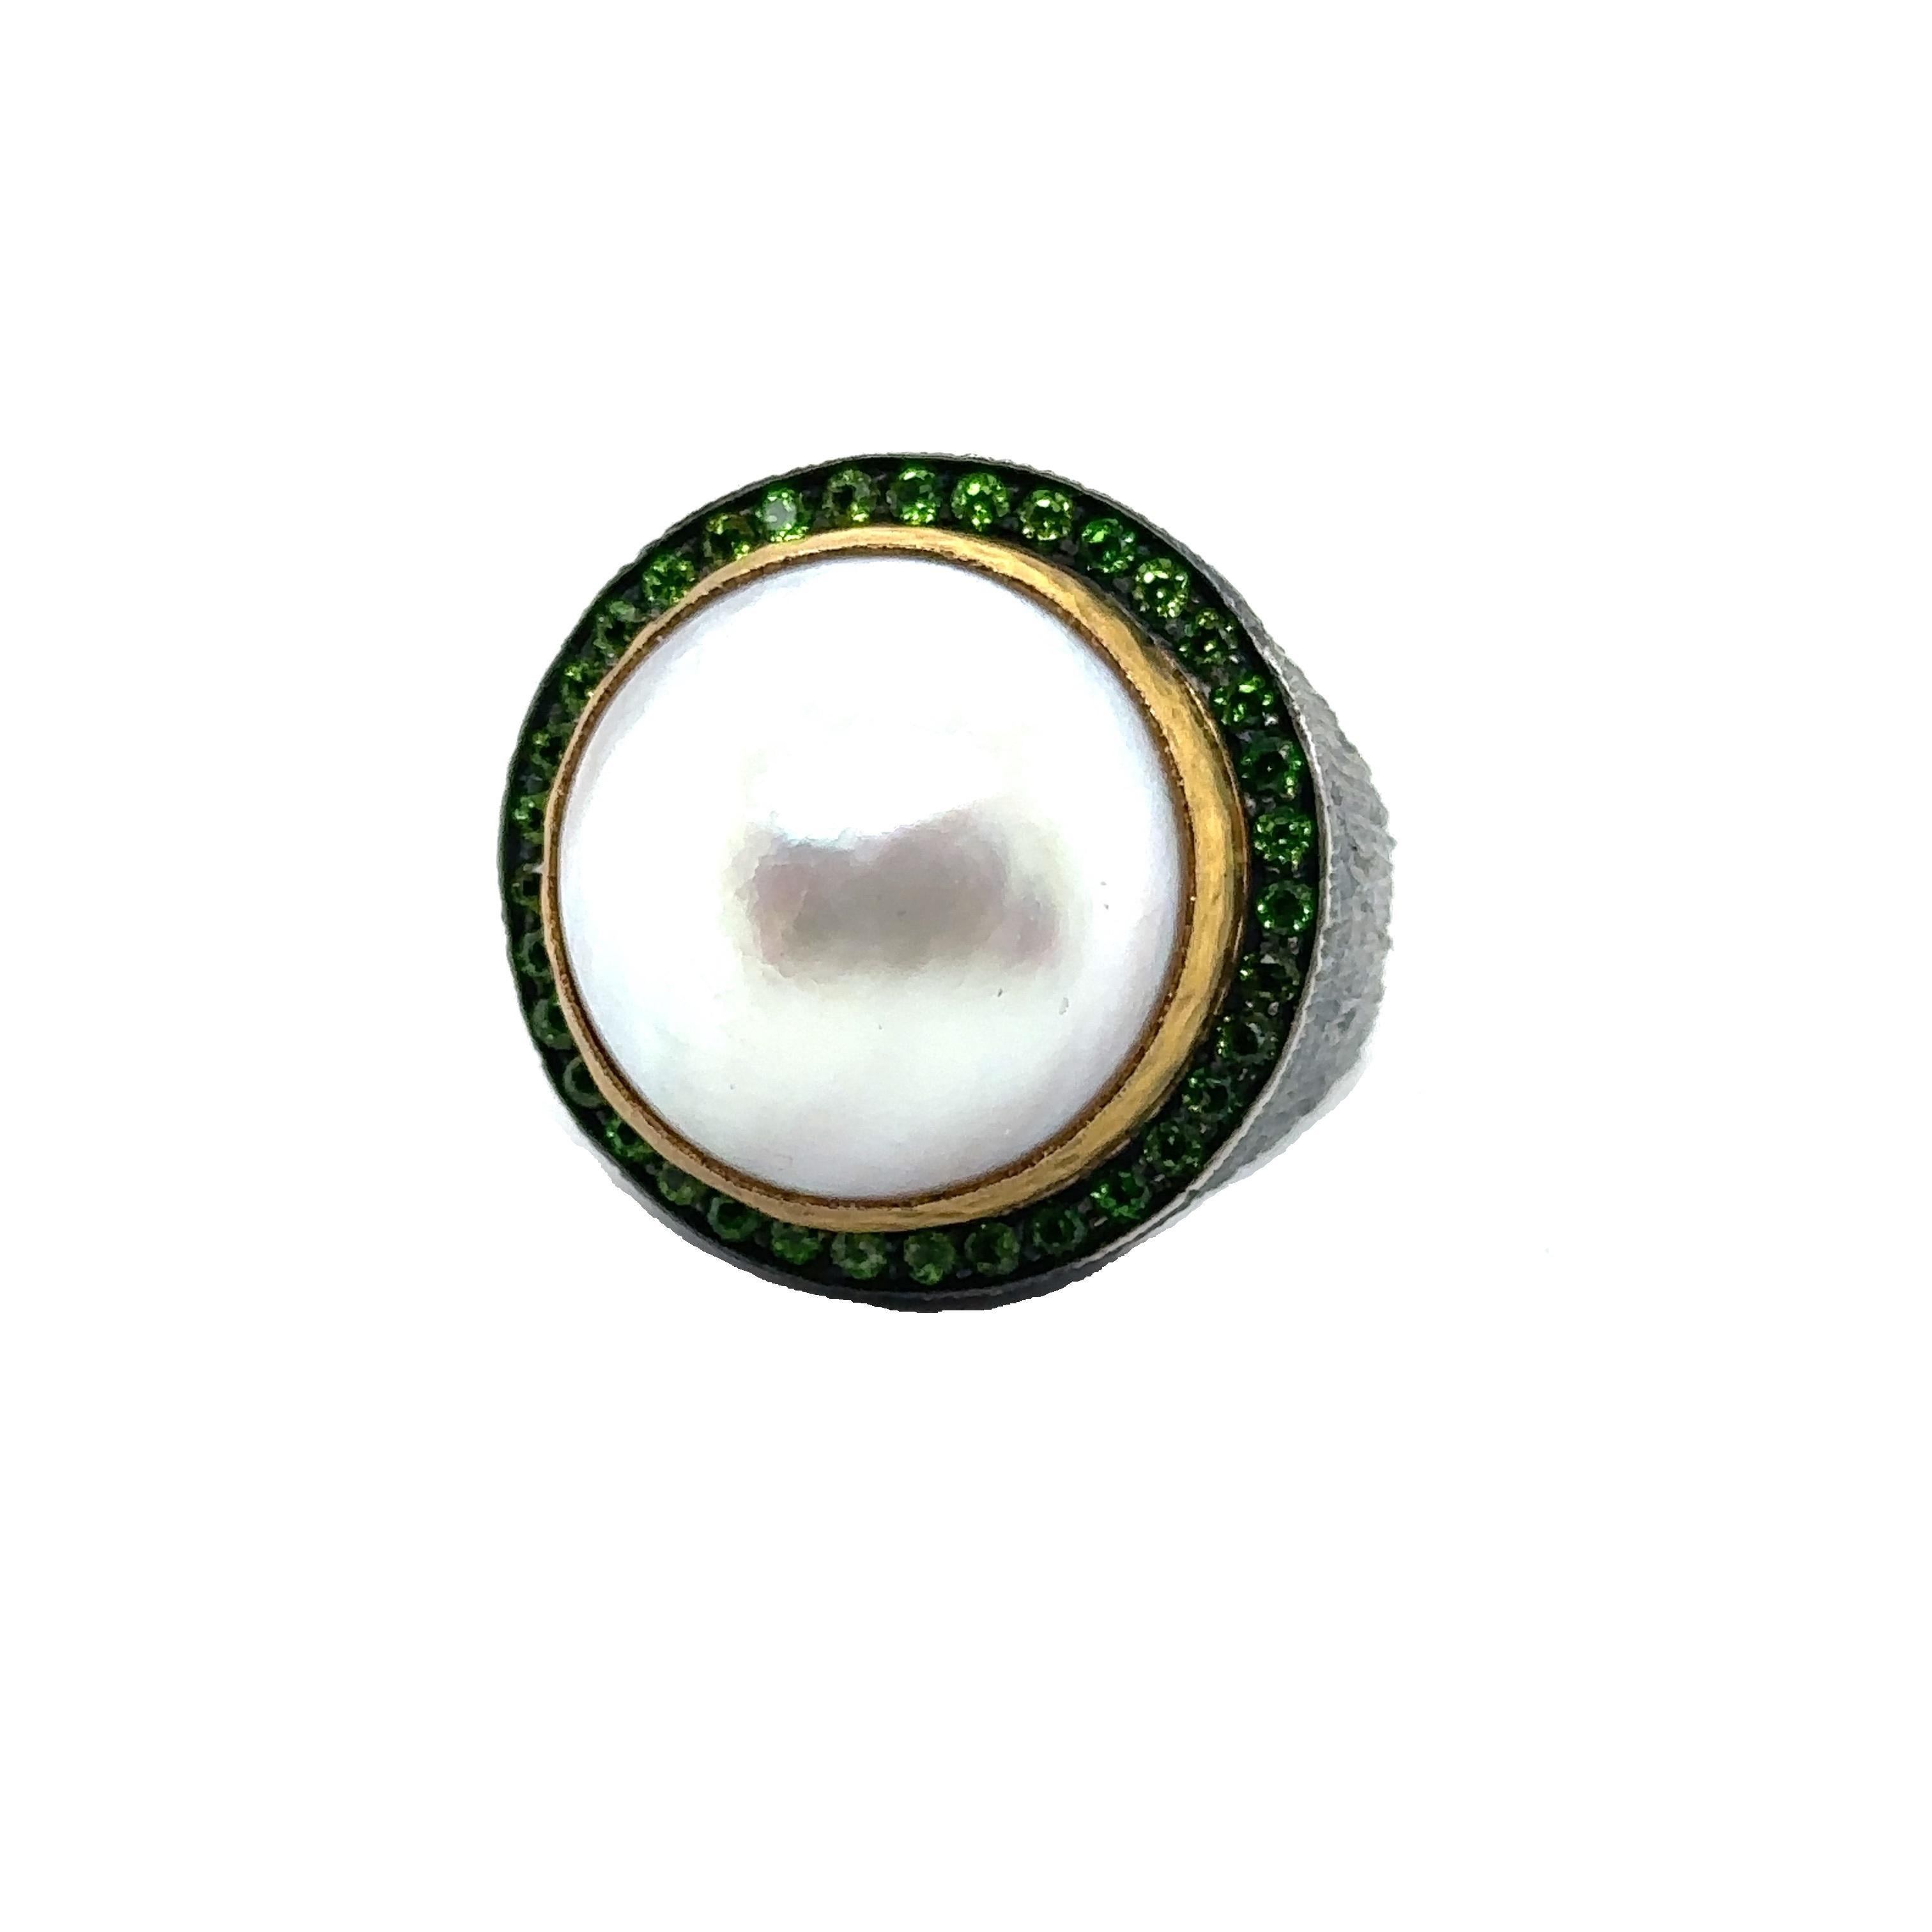 JAS-19-1970 - 24KT GOLD/SS 16MM MABE RING with 0.65CT CHROM DIOPSIDES For Sale 1